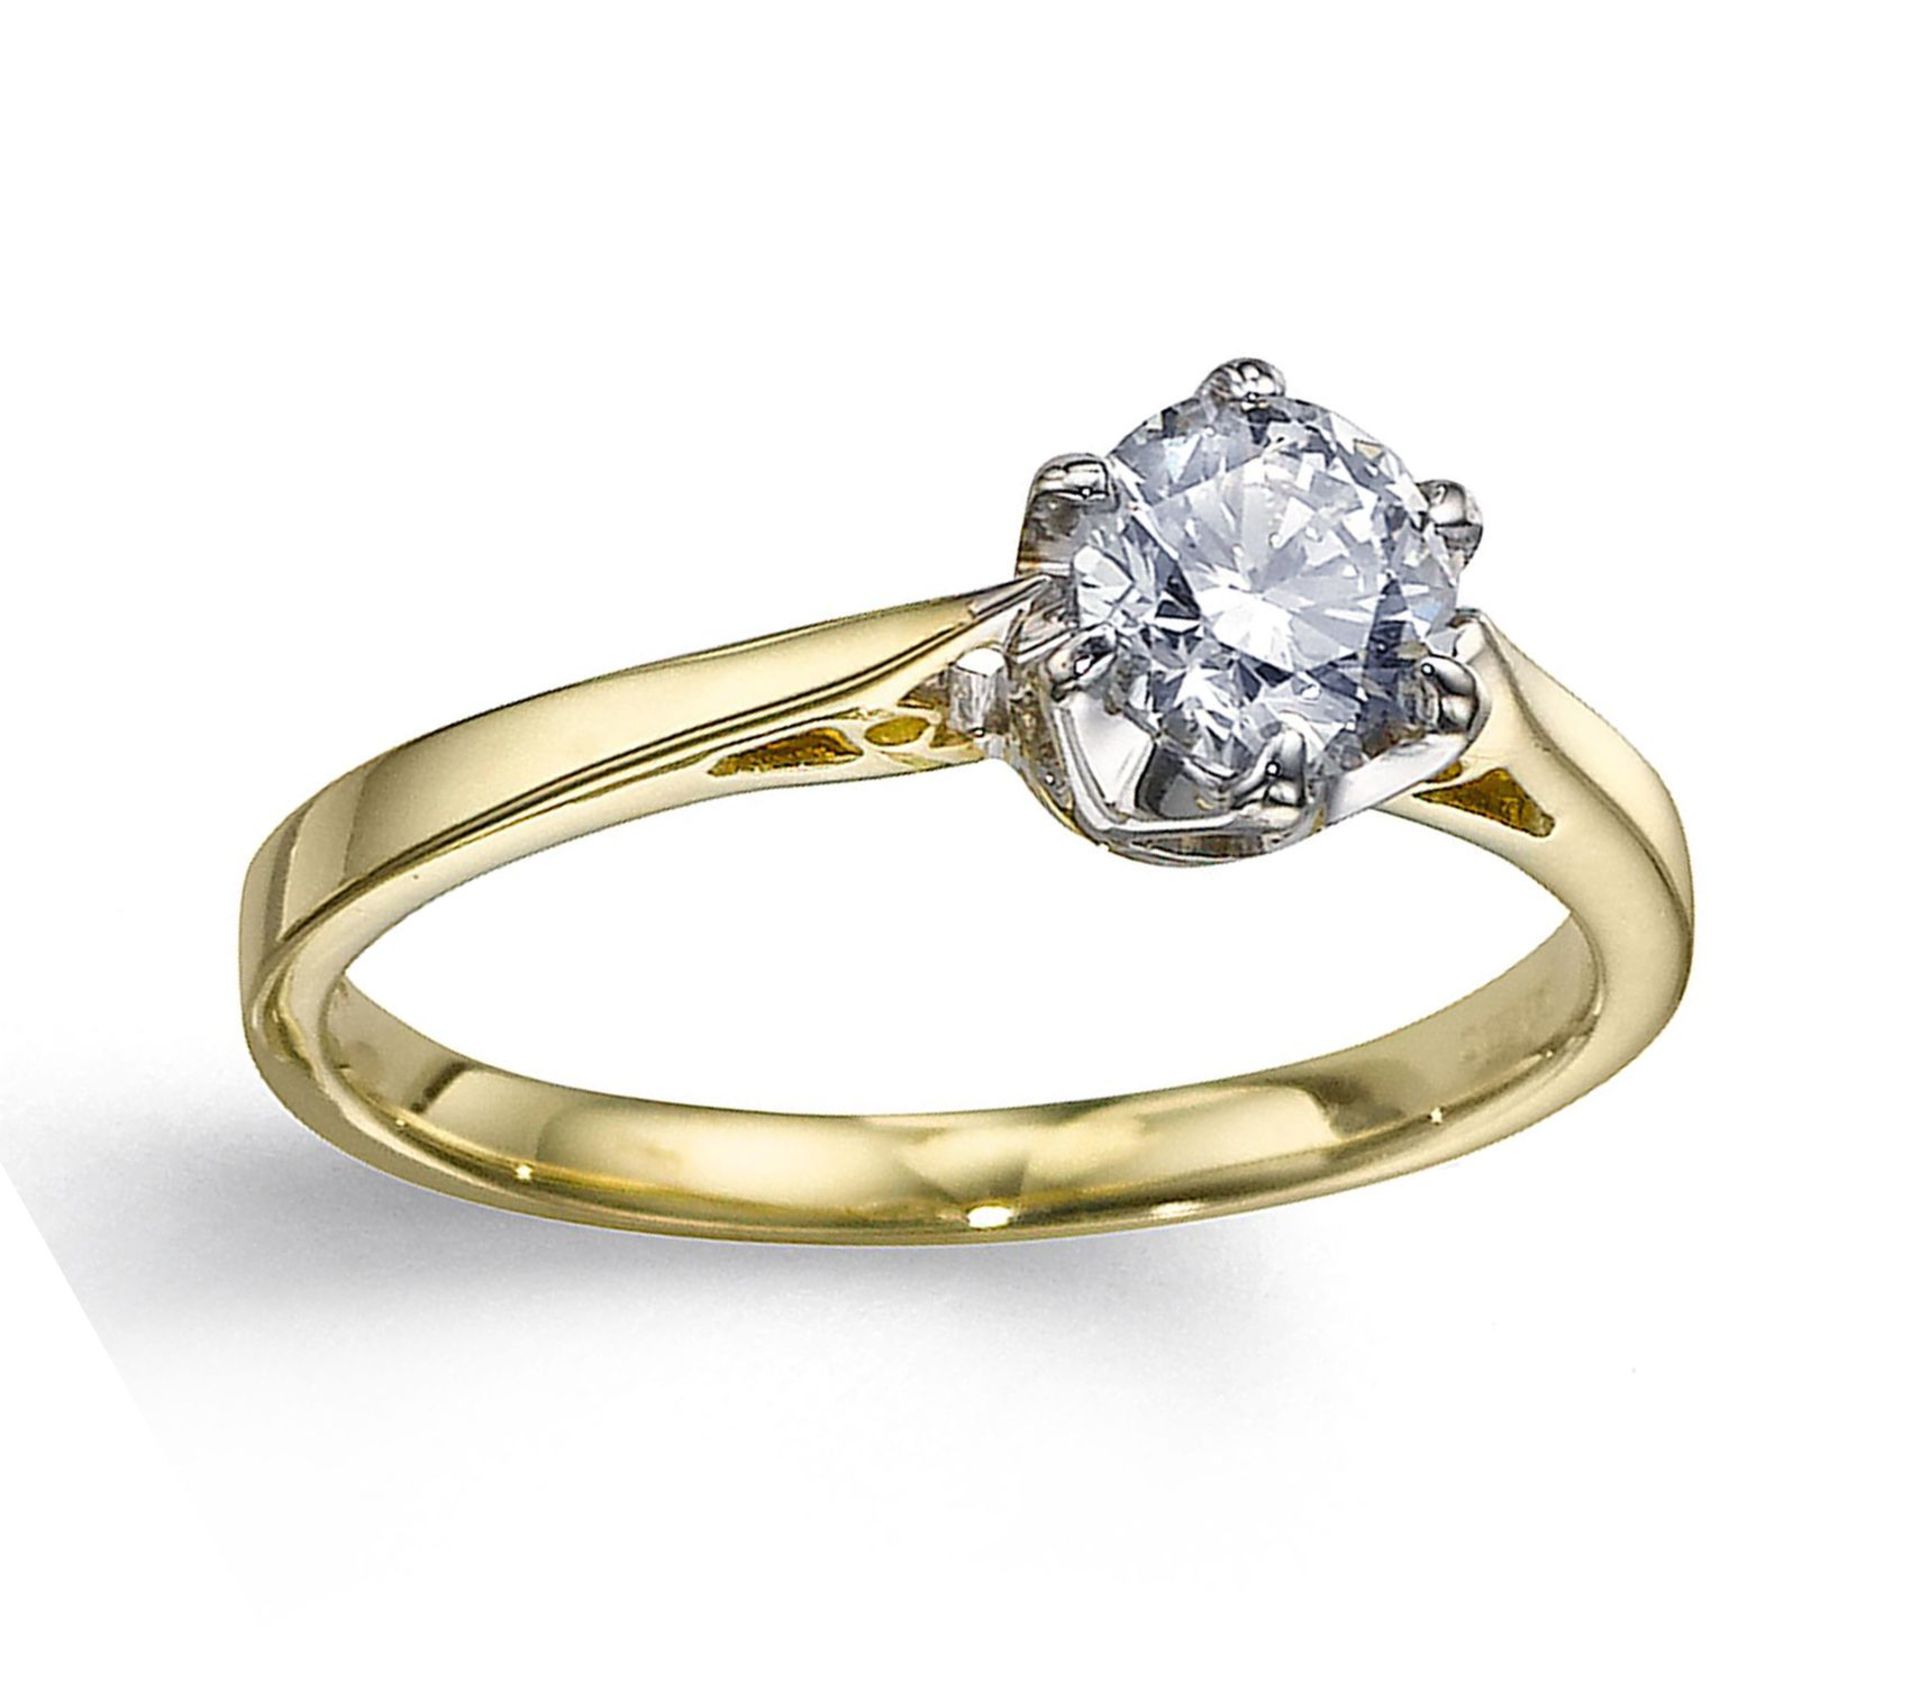 6 Claw Diamond Solitaire Engagement Yellow Gold Ring Size L RRP £1140 (FAD034)